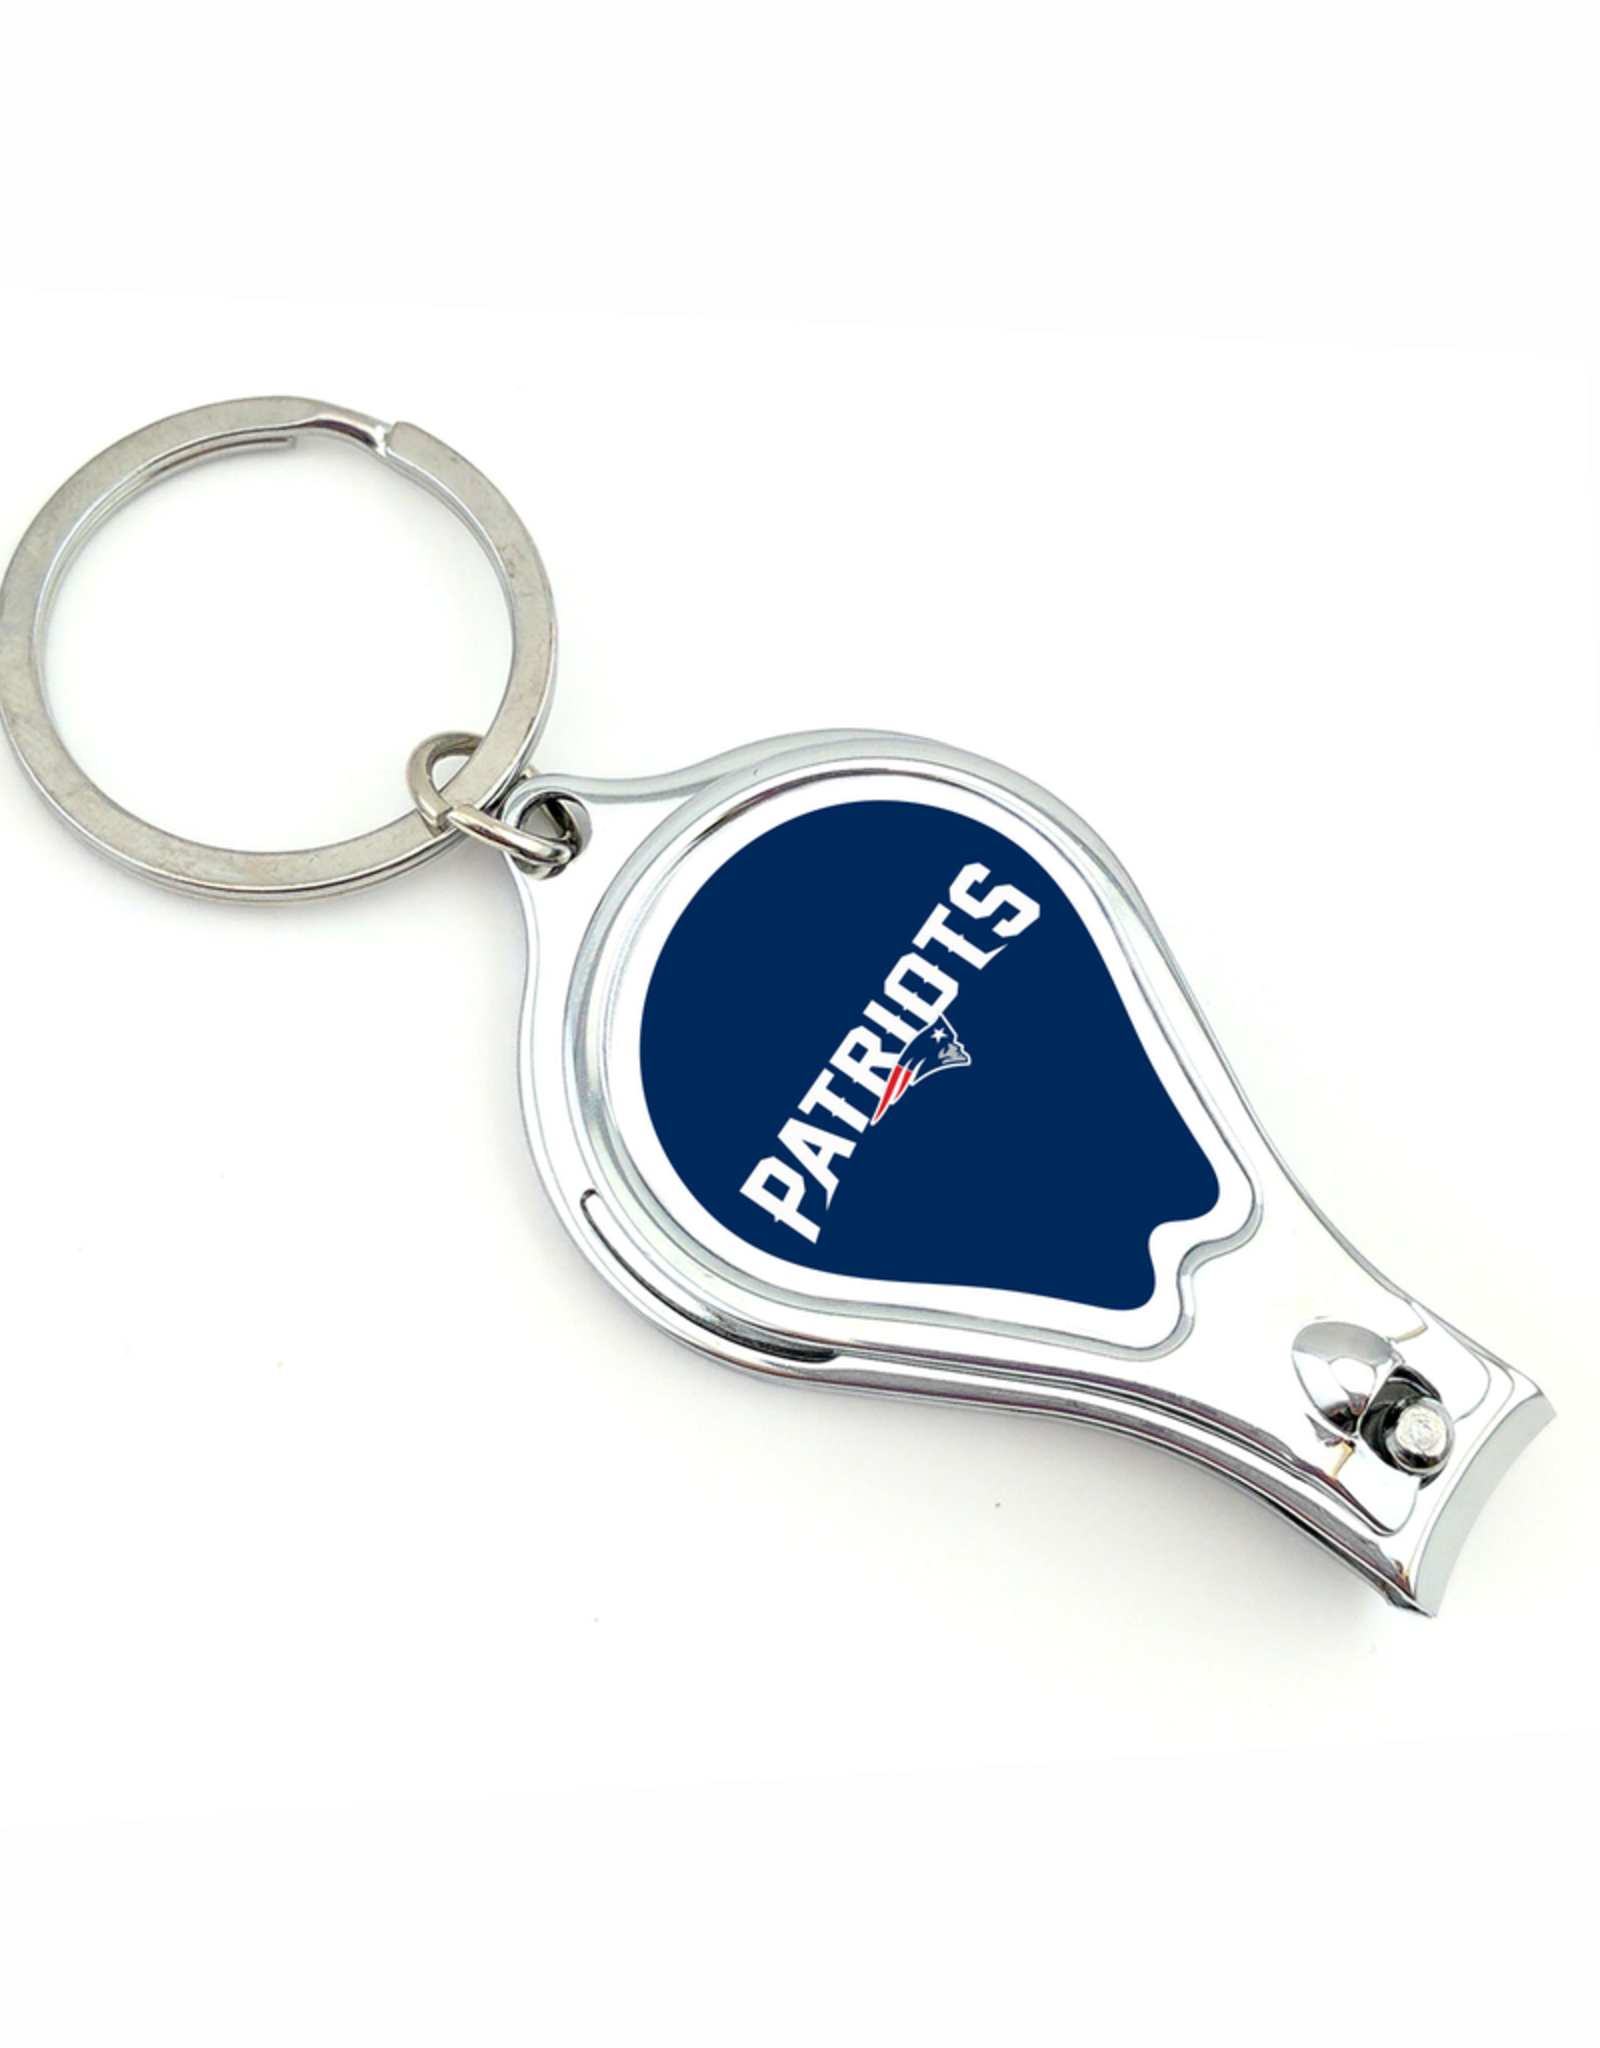 WORTHY PROMOTIONAL PRODUCTS New England Patriots Multi Function Key Ring